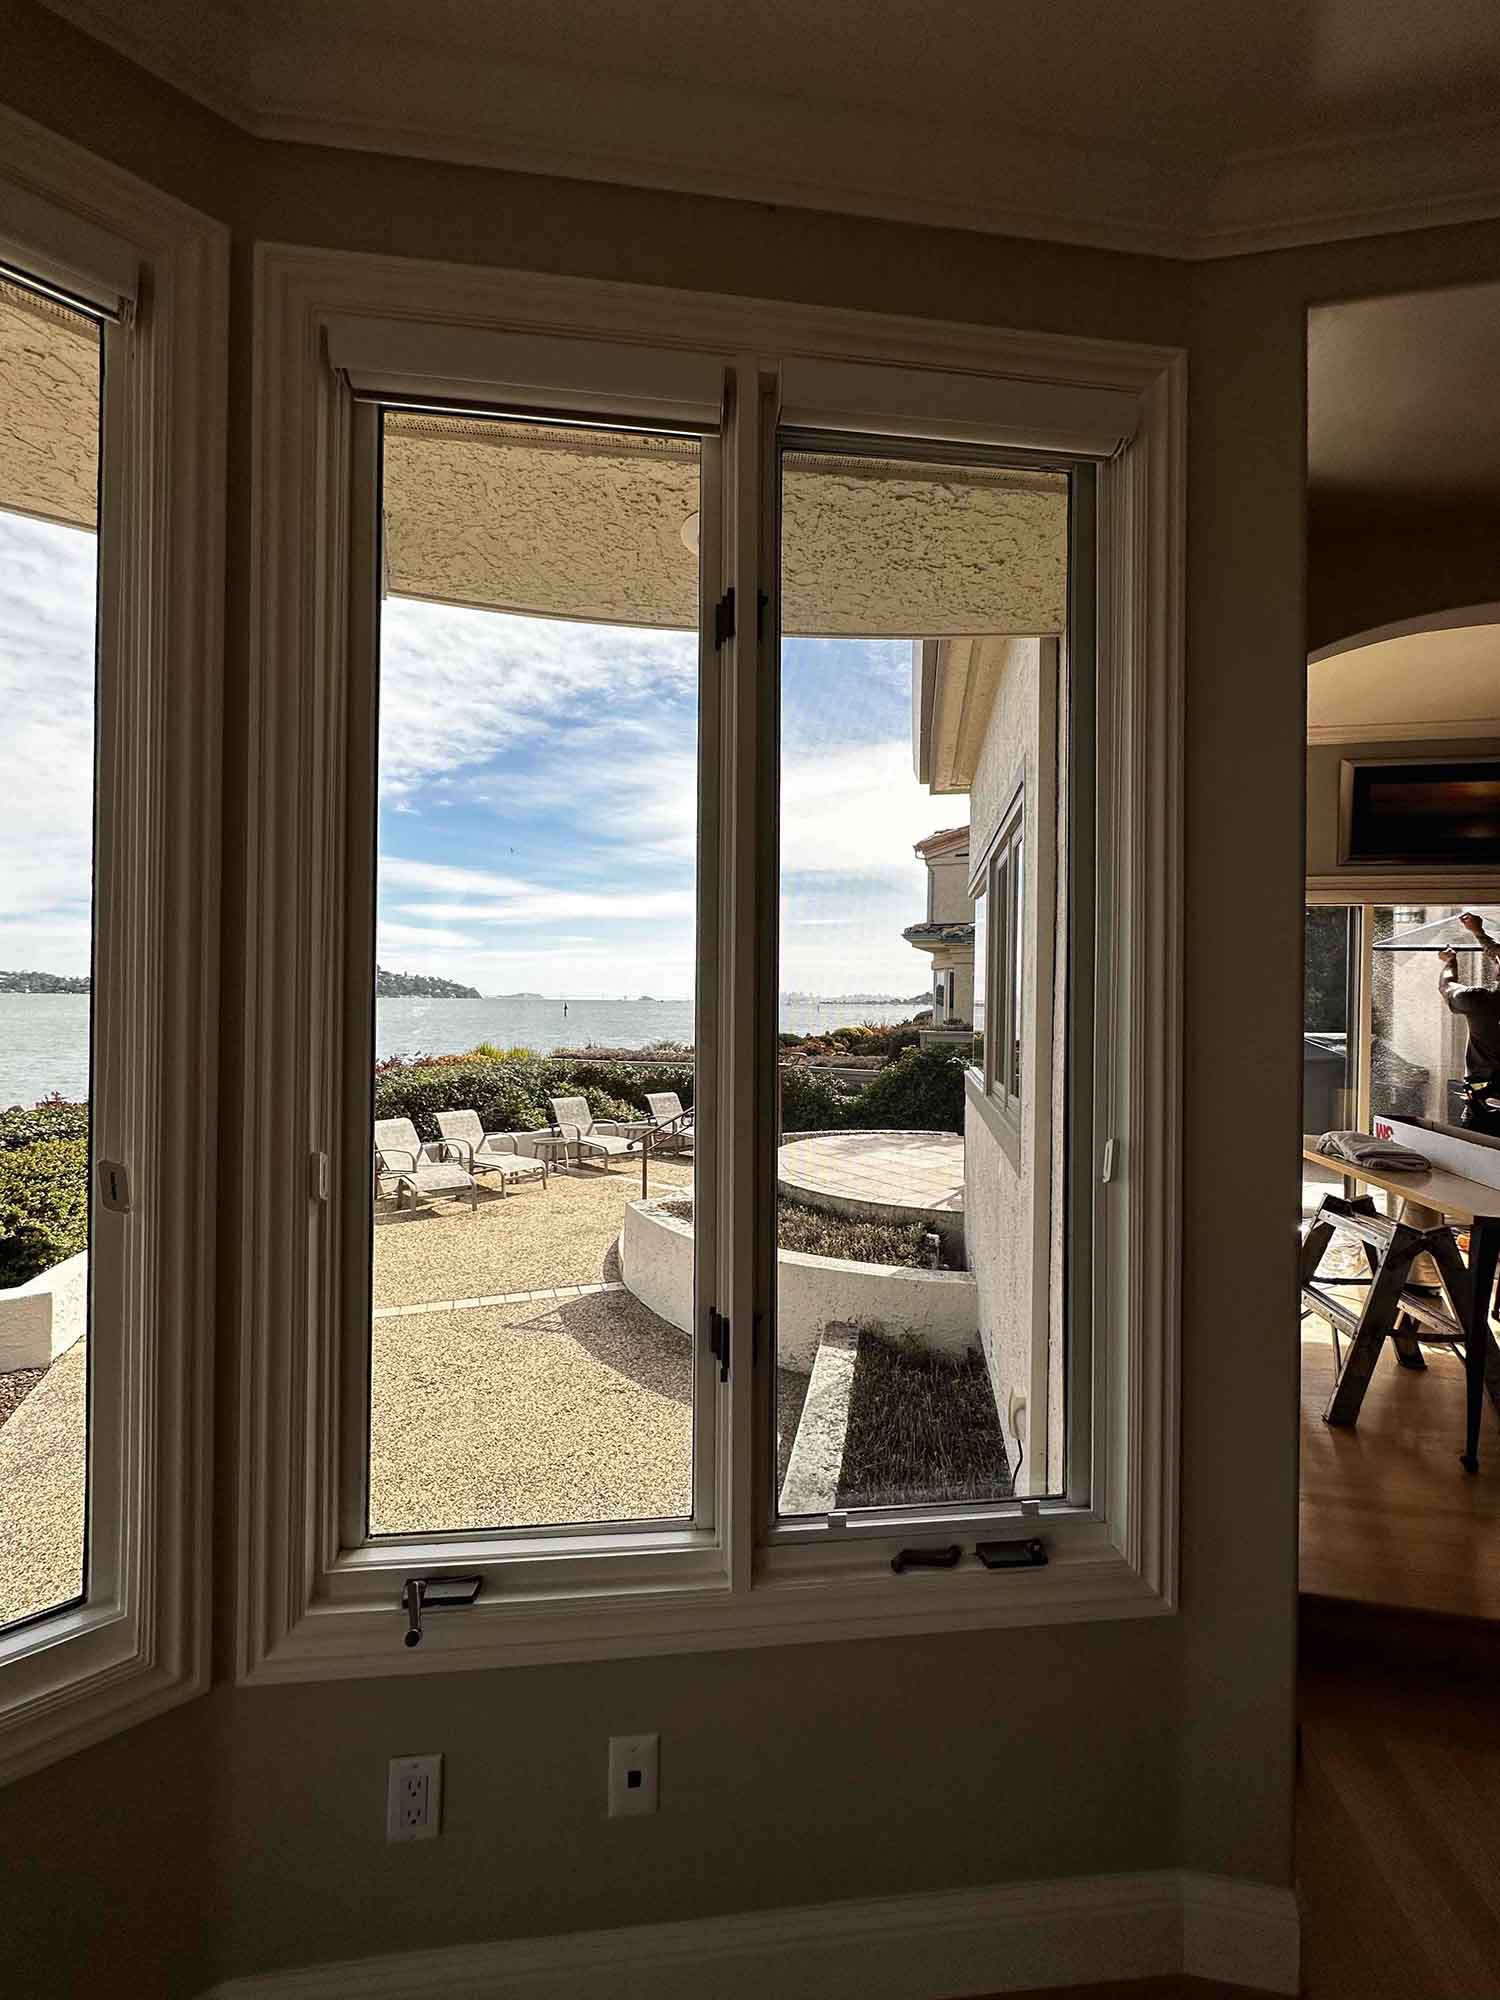 ClimatePro Installs 3M Window Film for Mill Valley, CA Homes. Get a free estimate for your Marin County home.